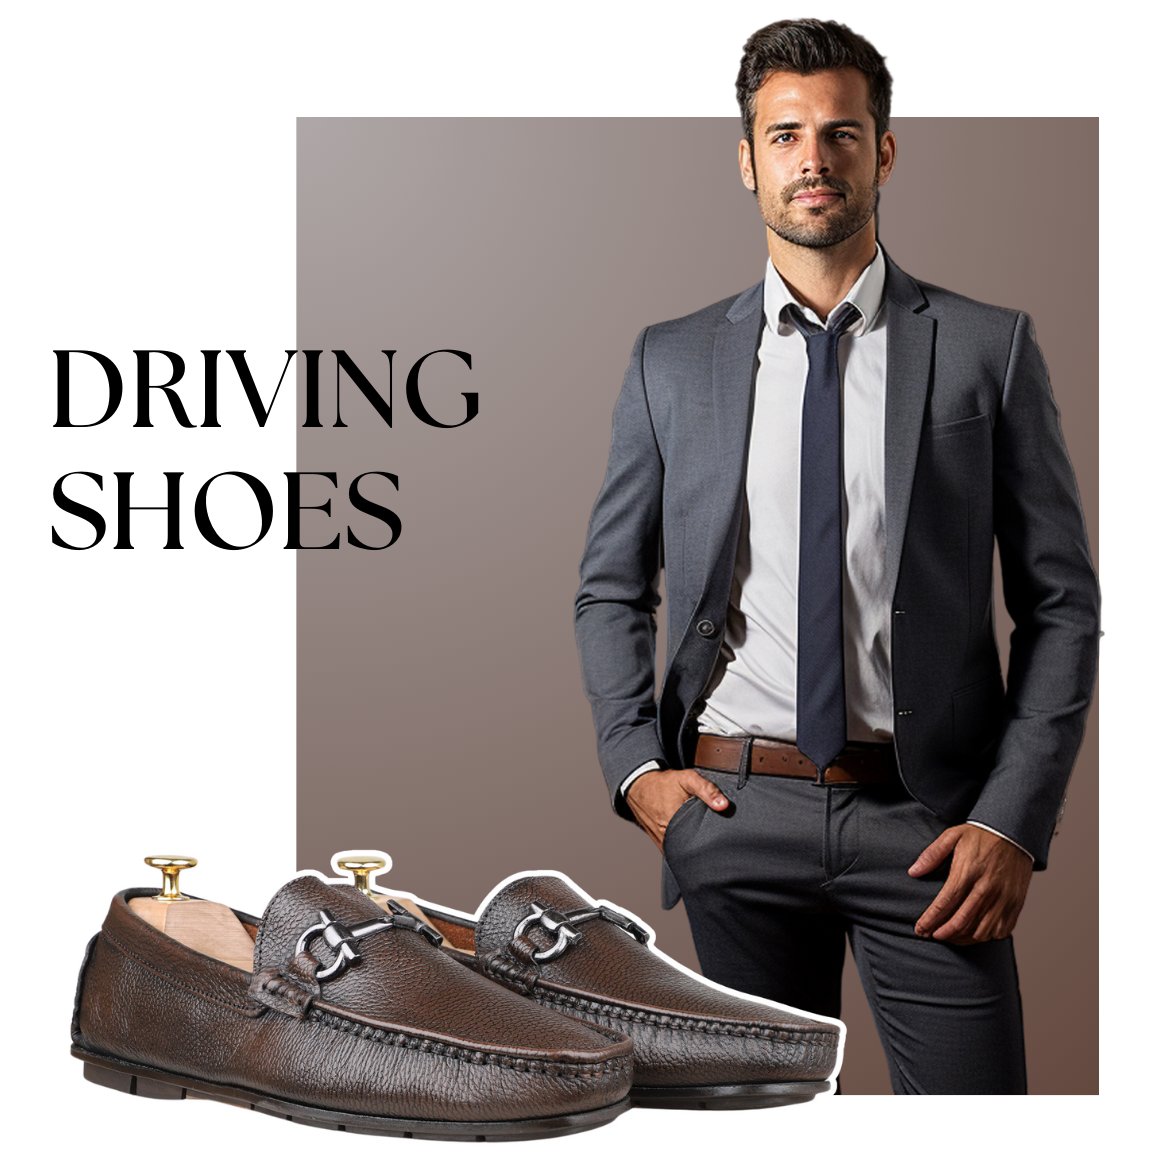 DRIVING SHOES